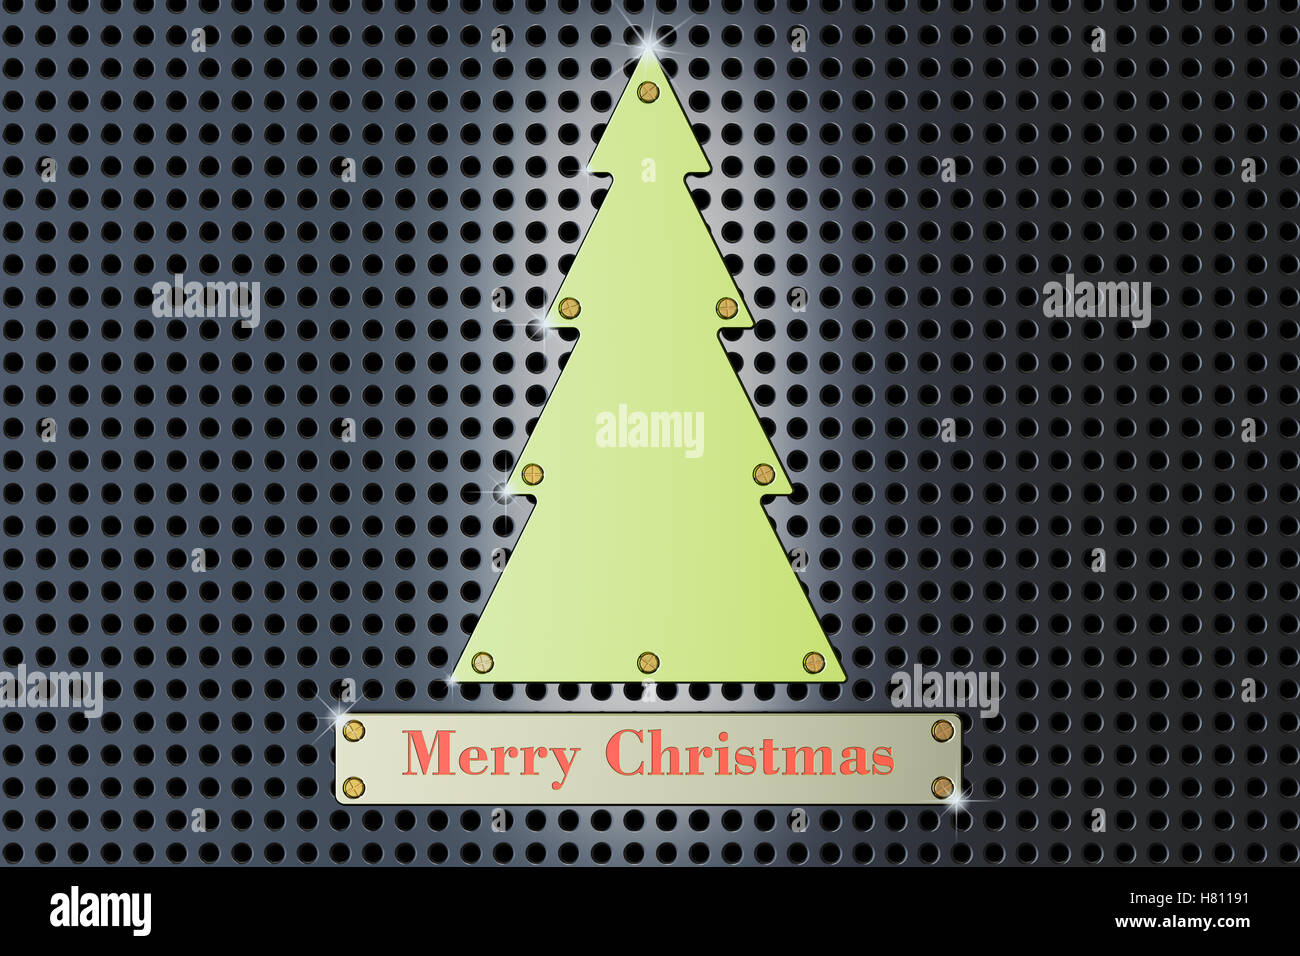 Merry Christmas concept with green metallic Christmas Tree 3D rendering Stock Image